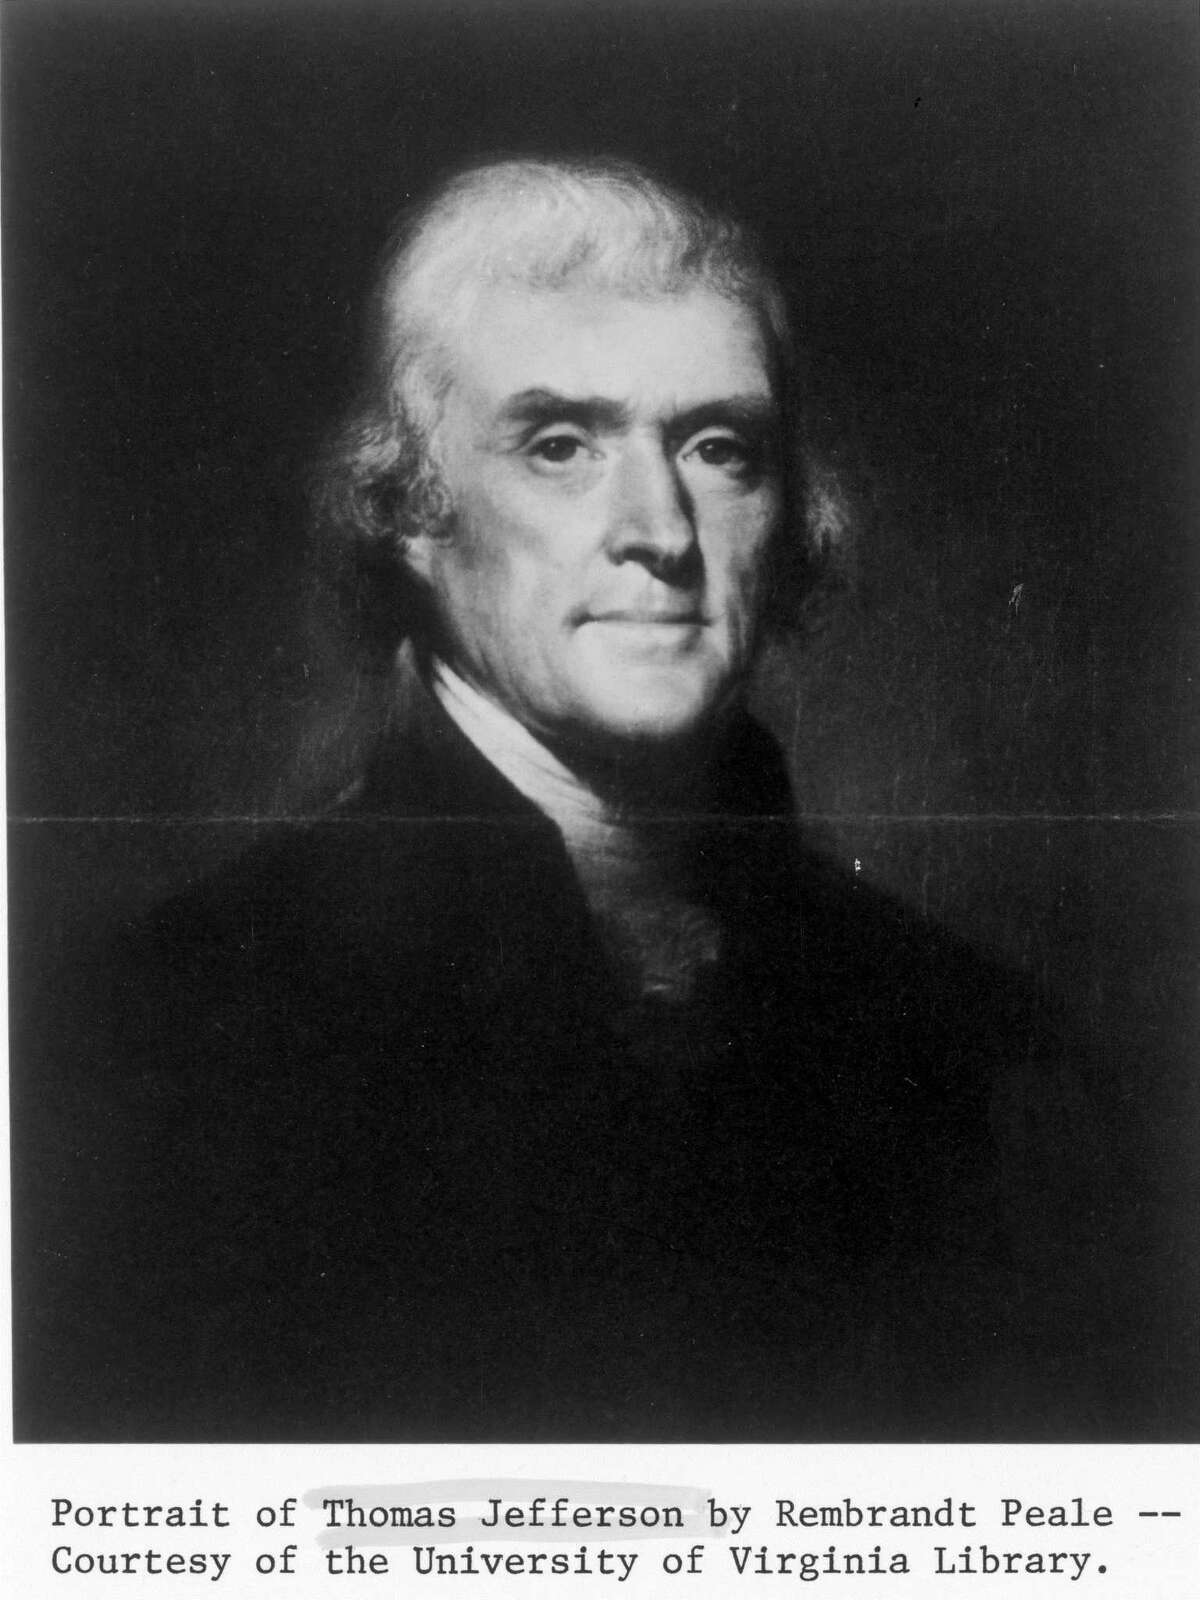 Portrait of Thomas Jefferson by Rembrandt Peale. Courtesy of the University of Virginia Library. HOUCHRON CAPTION (07/03/1994): Thomas Jefferson is the subject of a Fourth of July special at 6 p.m. on The Disney Channel. HOUCHRON CAPTION (04/30/1998): Jefferson. HOUCHRON CAPTION (01/28/2003): THE CHANGING MESSAGE - Here are a few facts about the State of the Union: In 1801, Thomas Jefferson submitted this annual message to Congress in writing only. For the next 112 years, the annual message was written, not spoken.